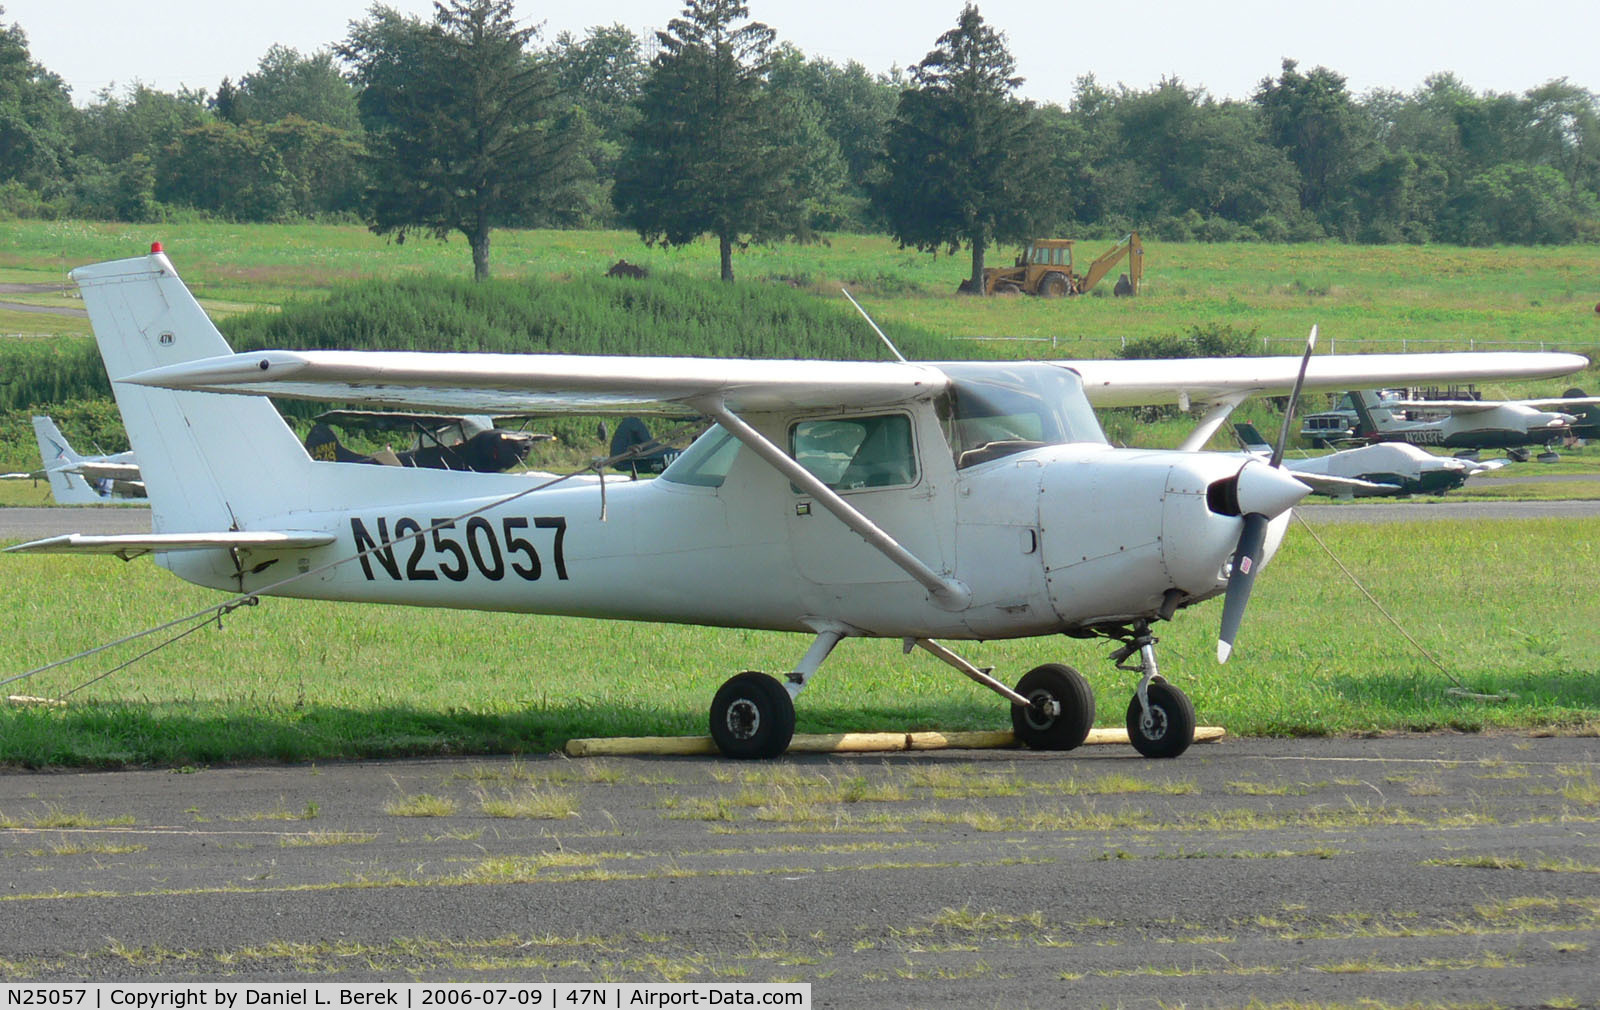 N25057, 1977 Cessna 152 C/N 15280520, Cute little trainer dating from 1977 is still on the job, going strong.